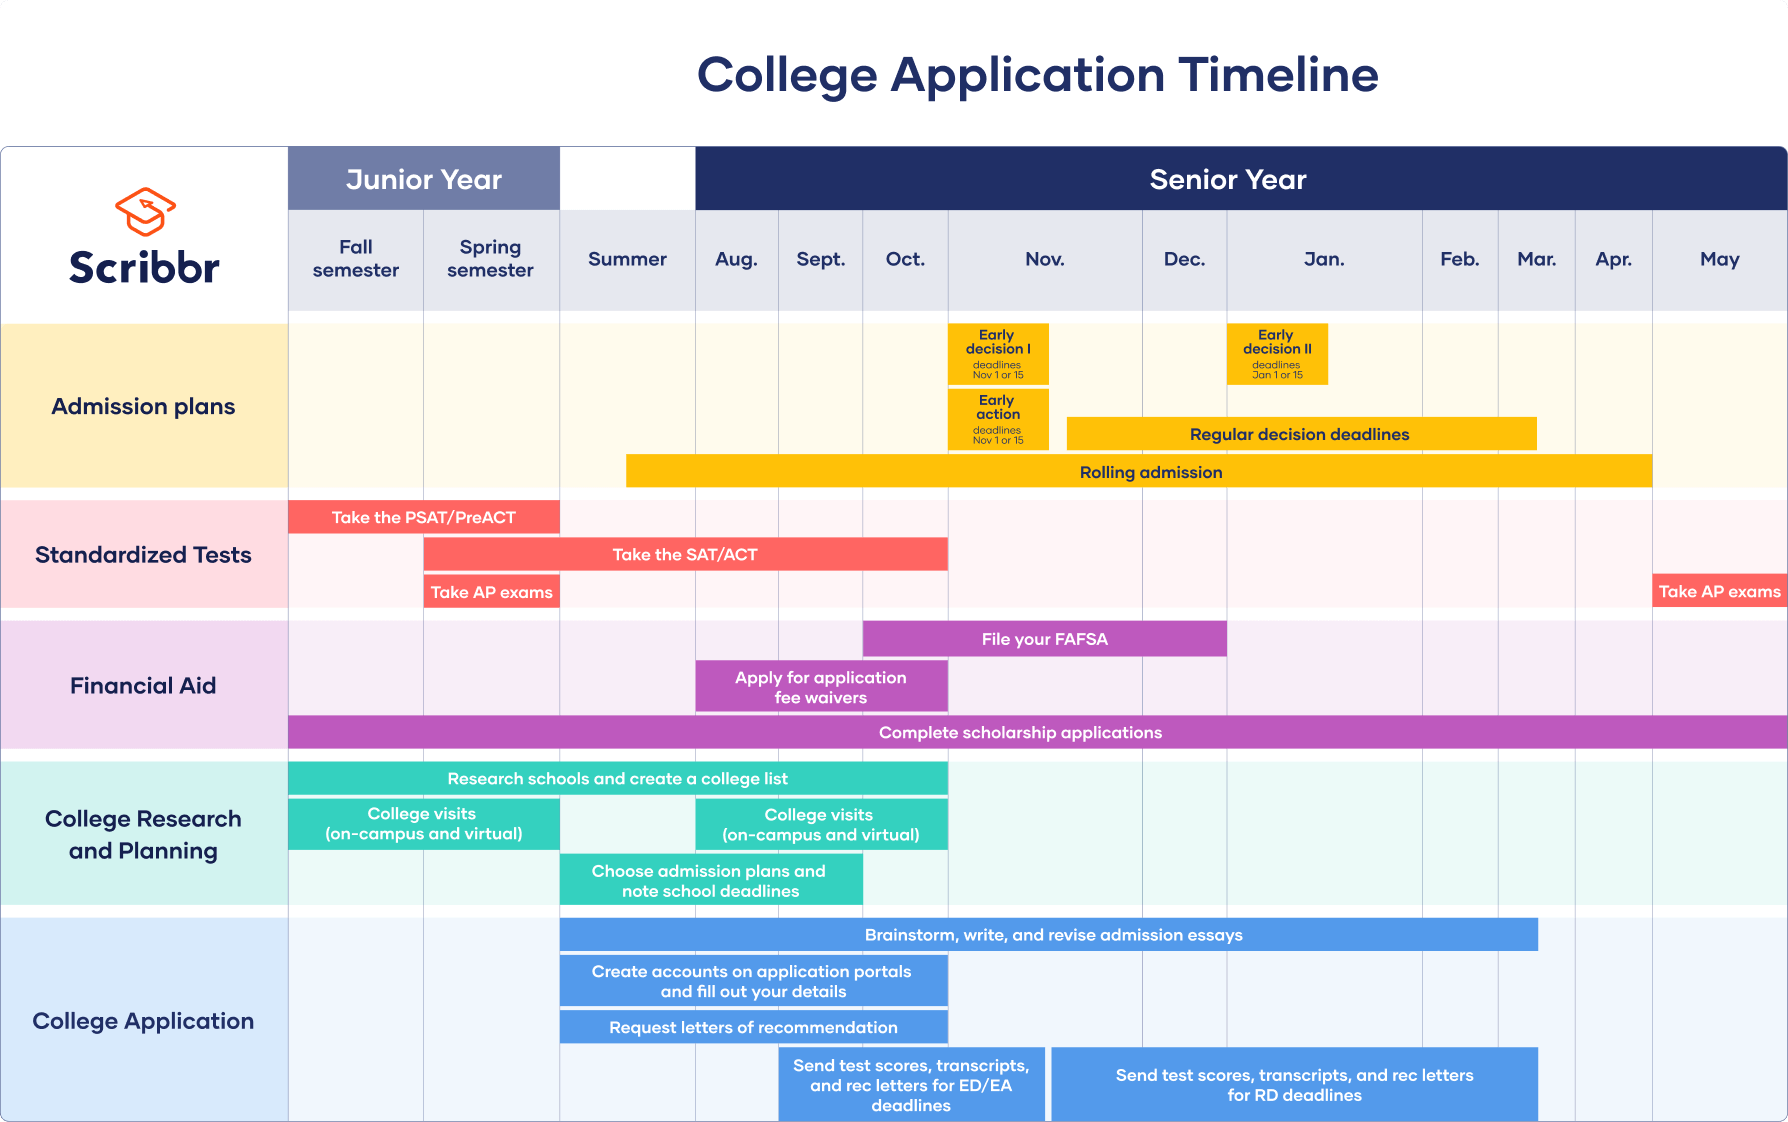 How to Apply for College Timeline, Templates & Checklist